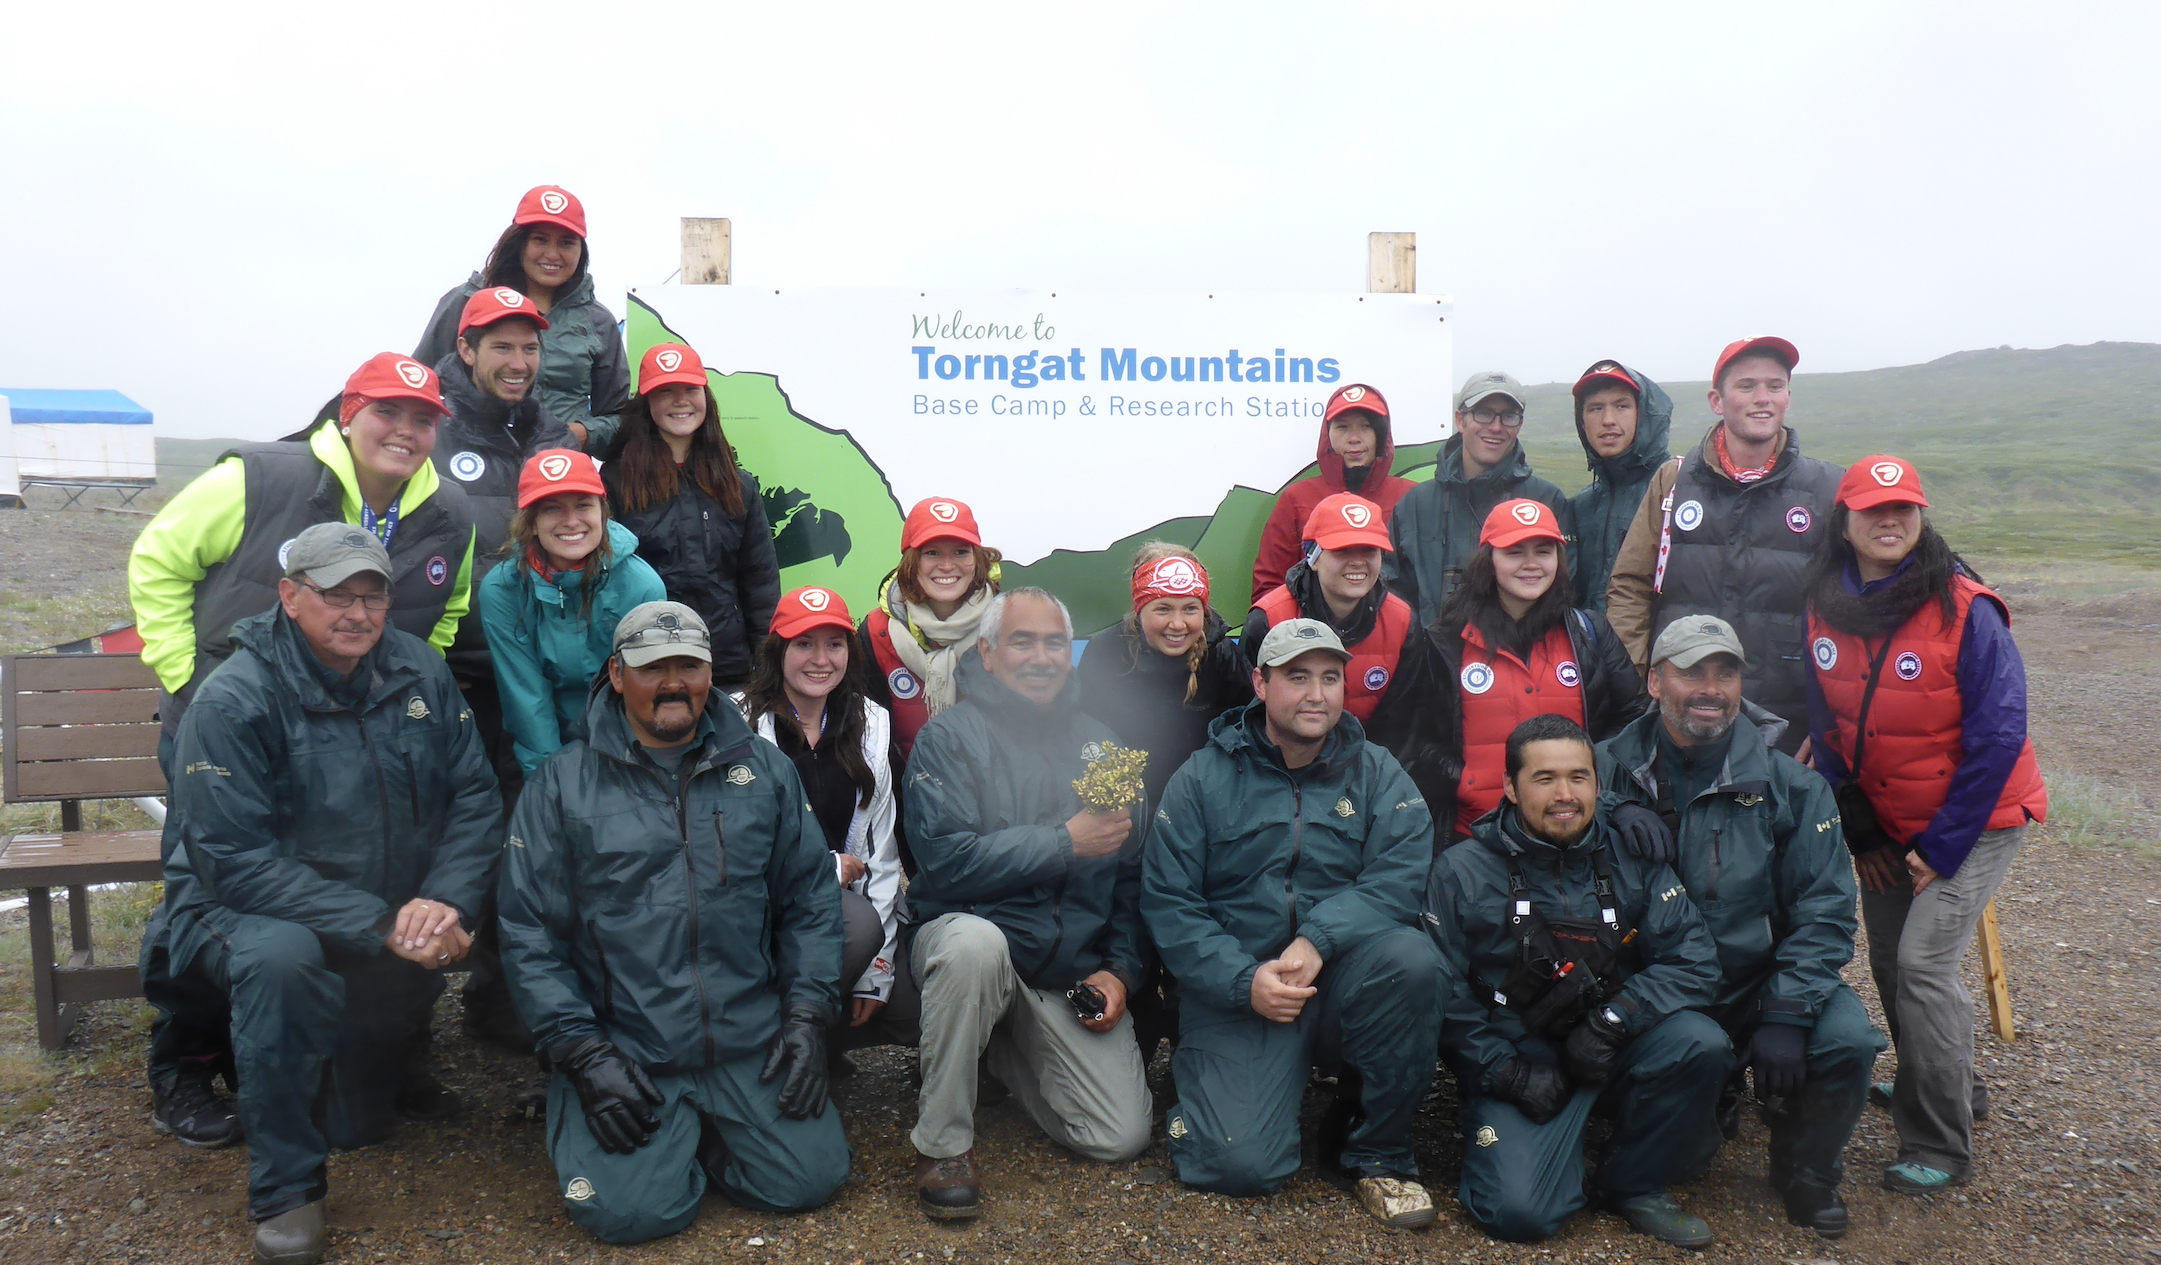 Sarah and her teammates in front of a Welcome to Torngat Mountains sign